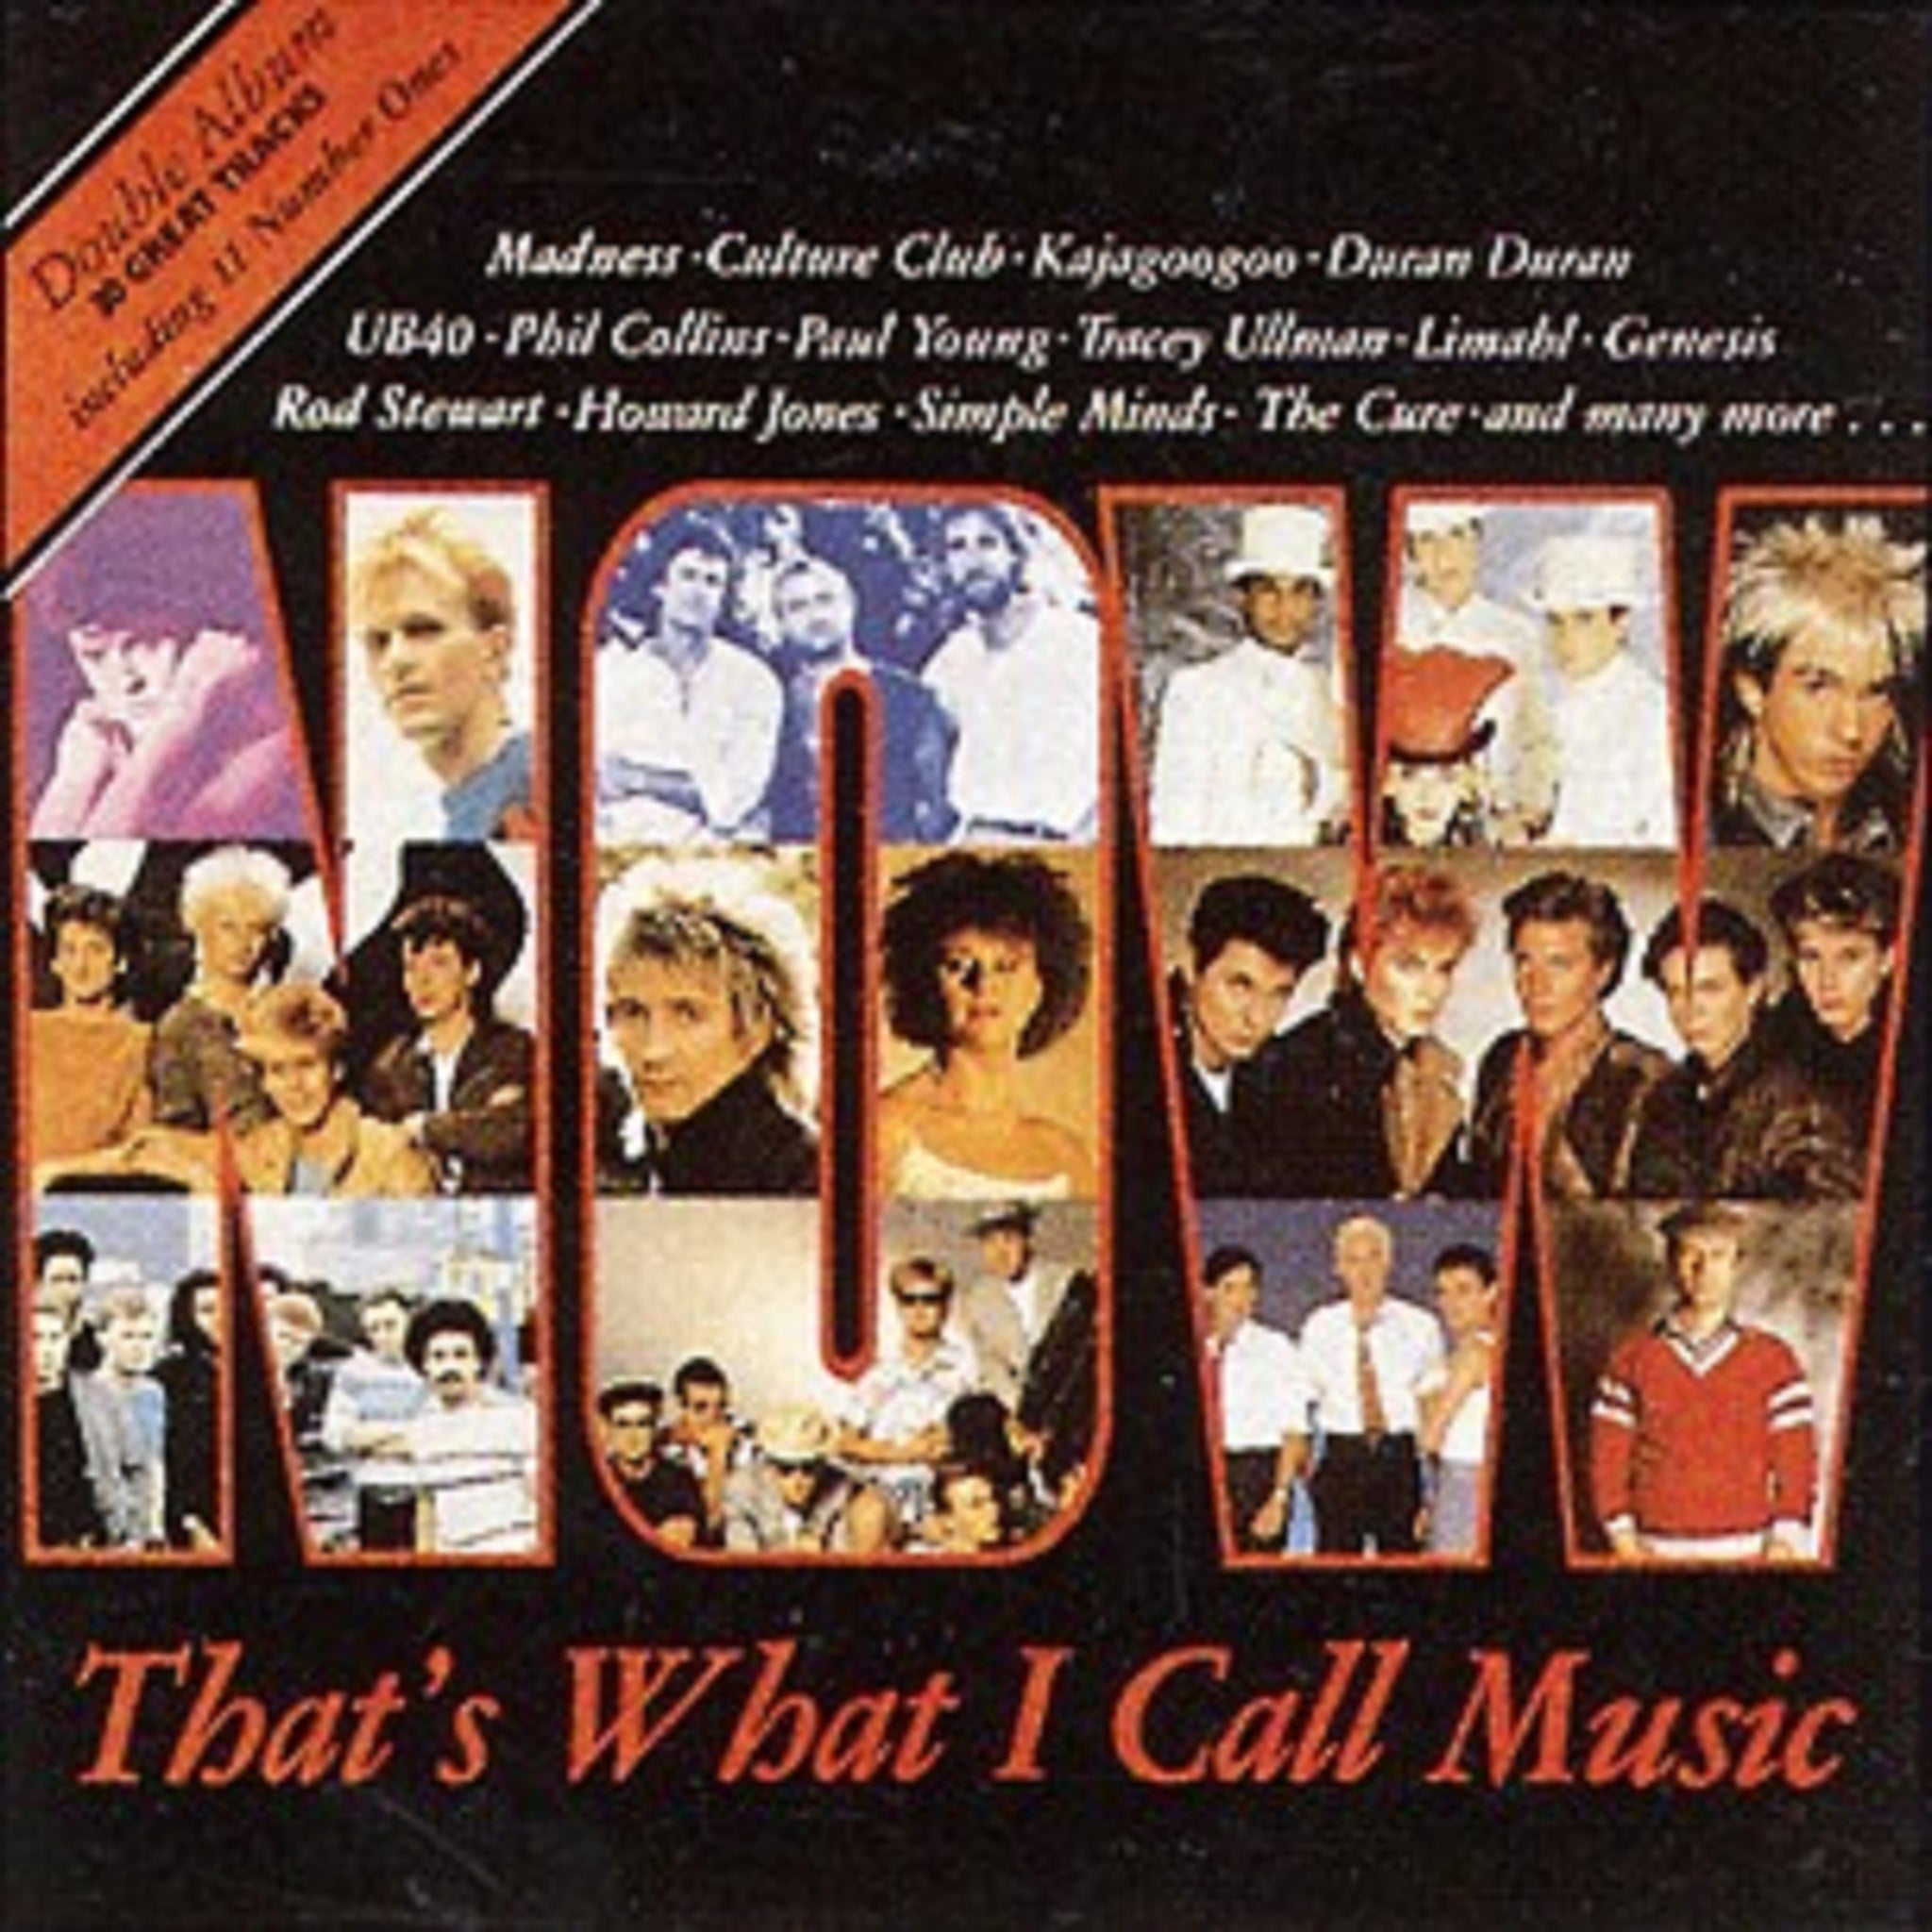 The first Now That's What I Call Music was released on 28 November 1983